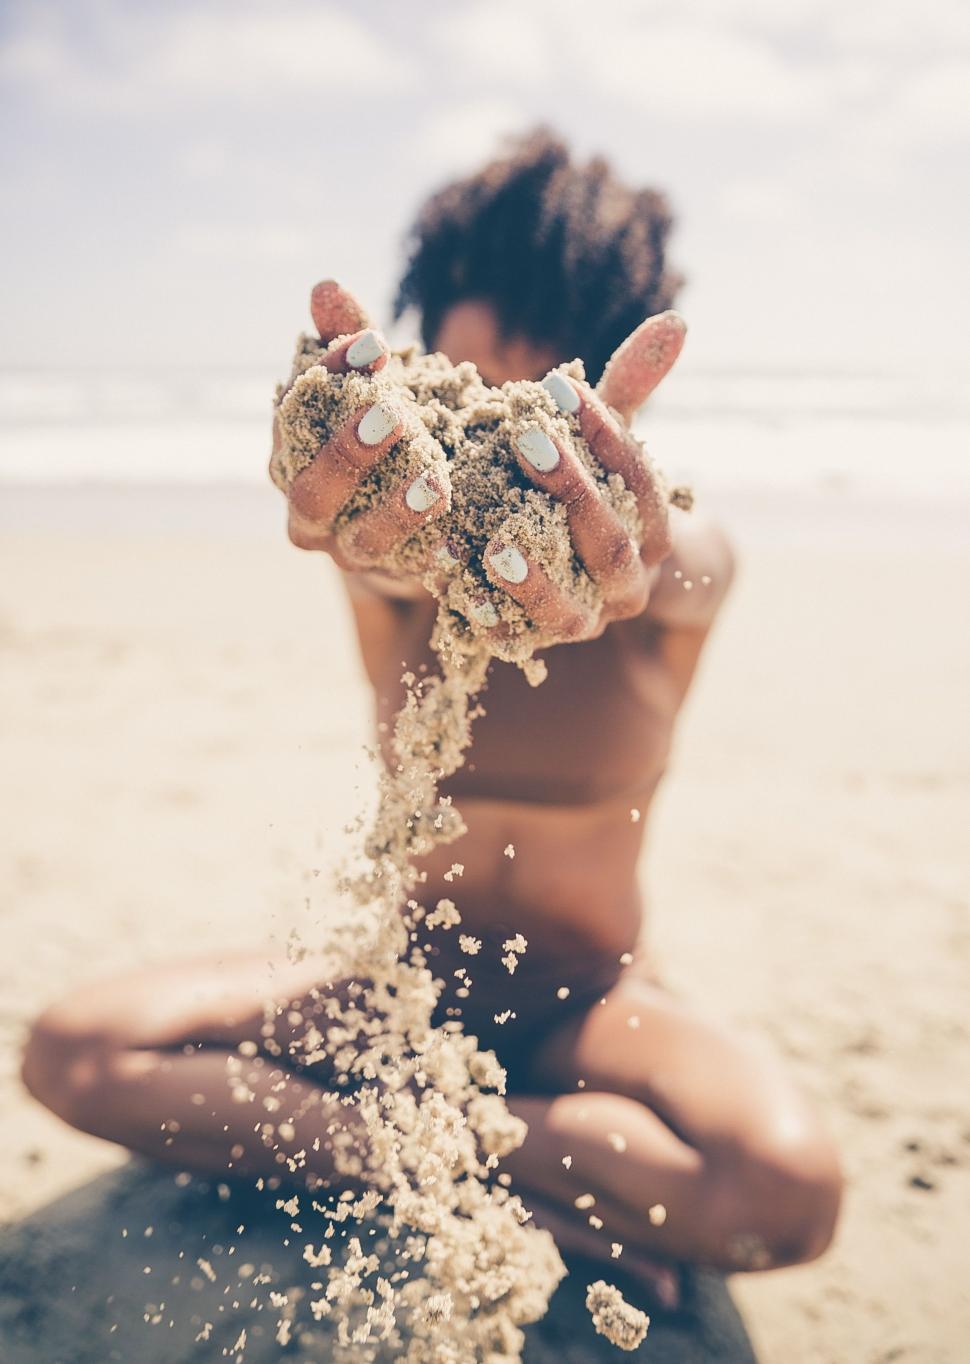 Free Image of Sand in hands  